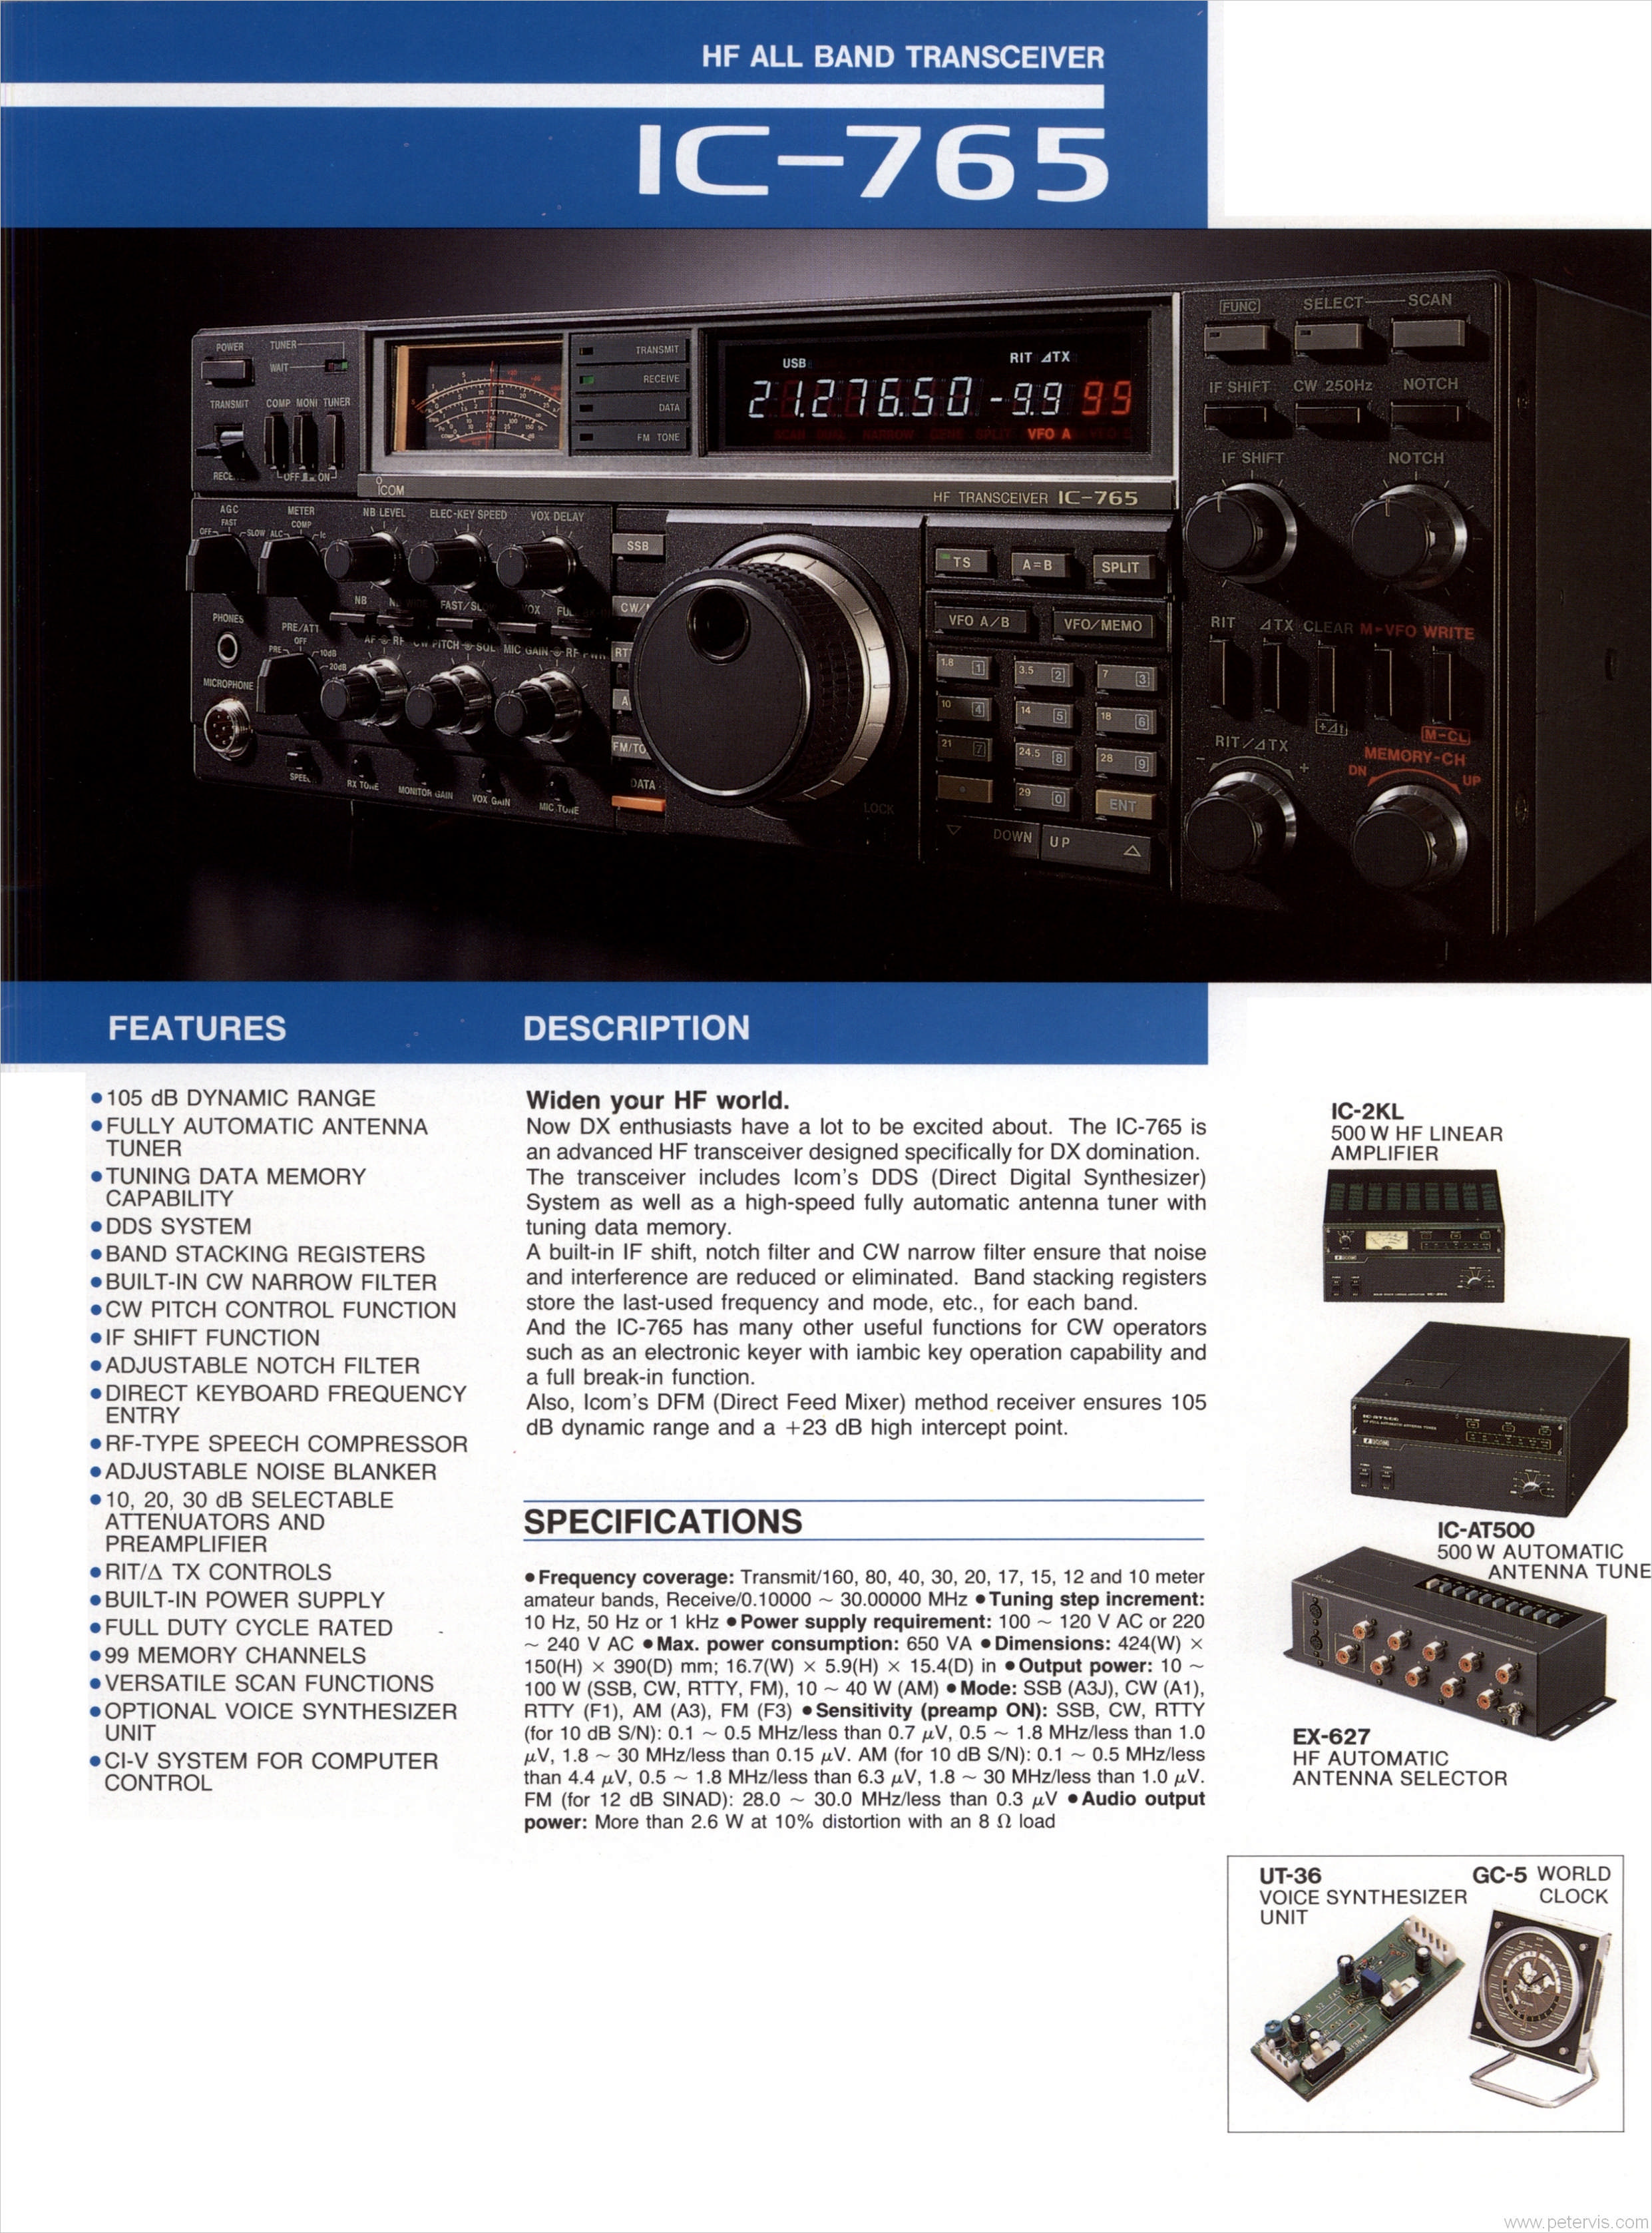 IC-765 SPECIFICATION and FEATURES